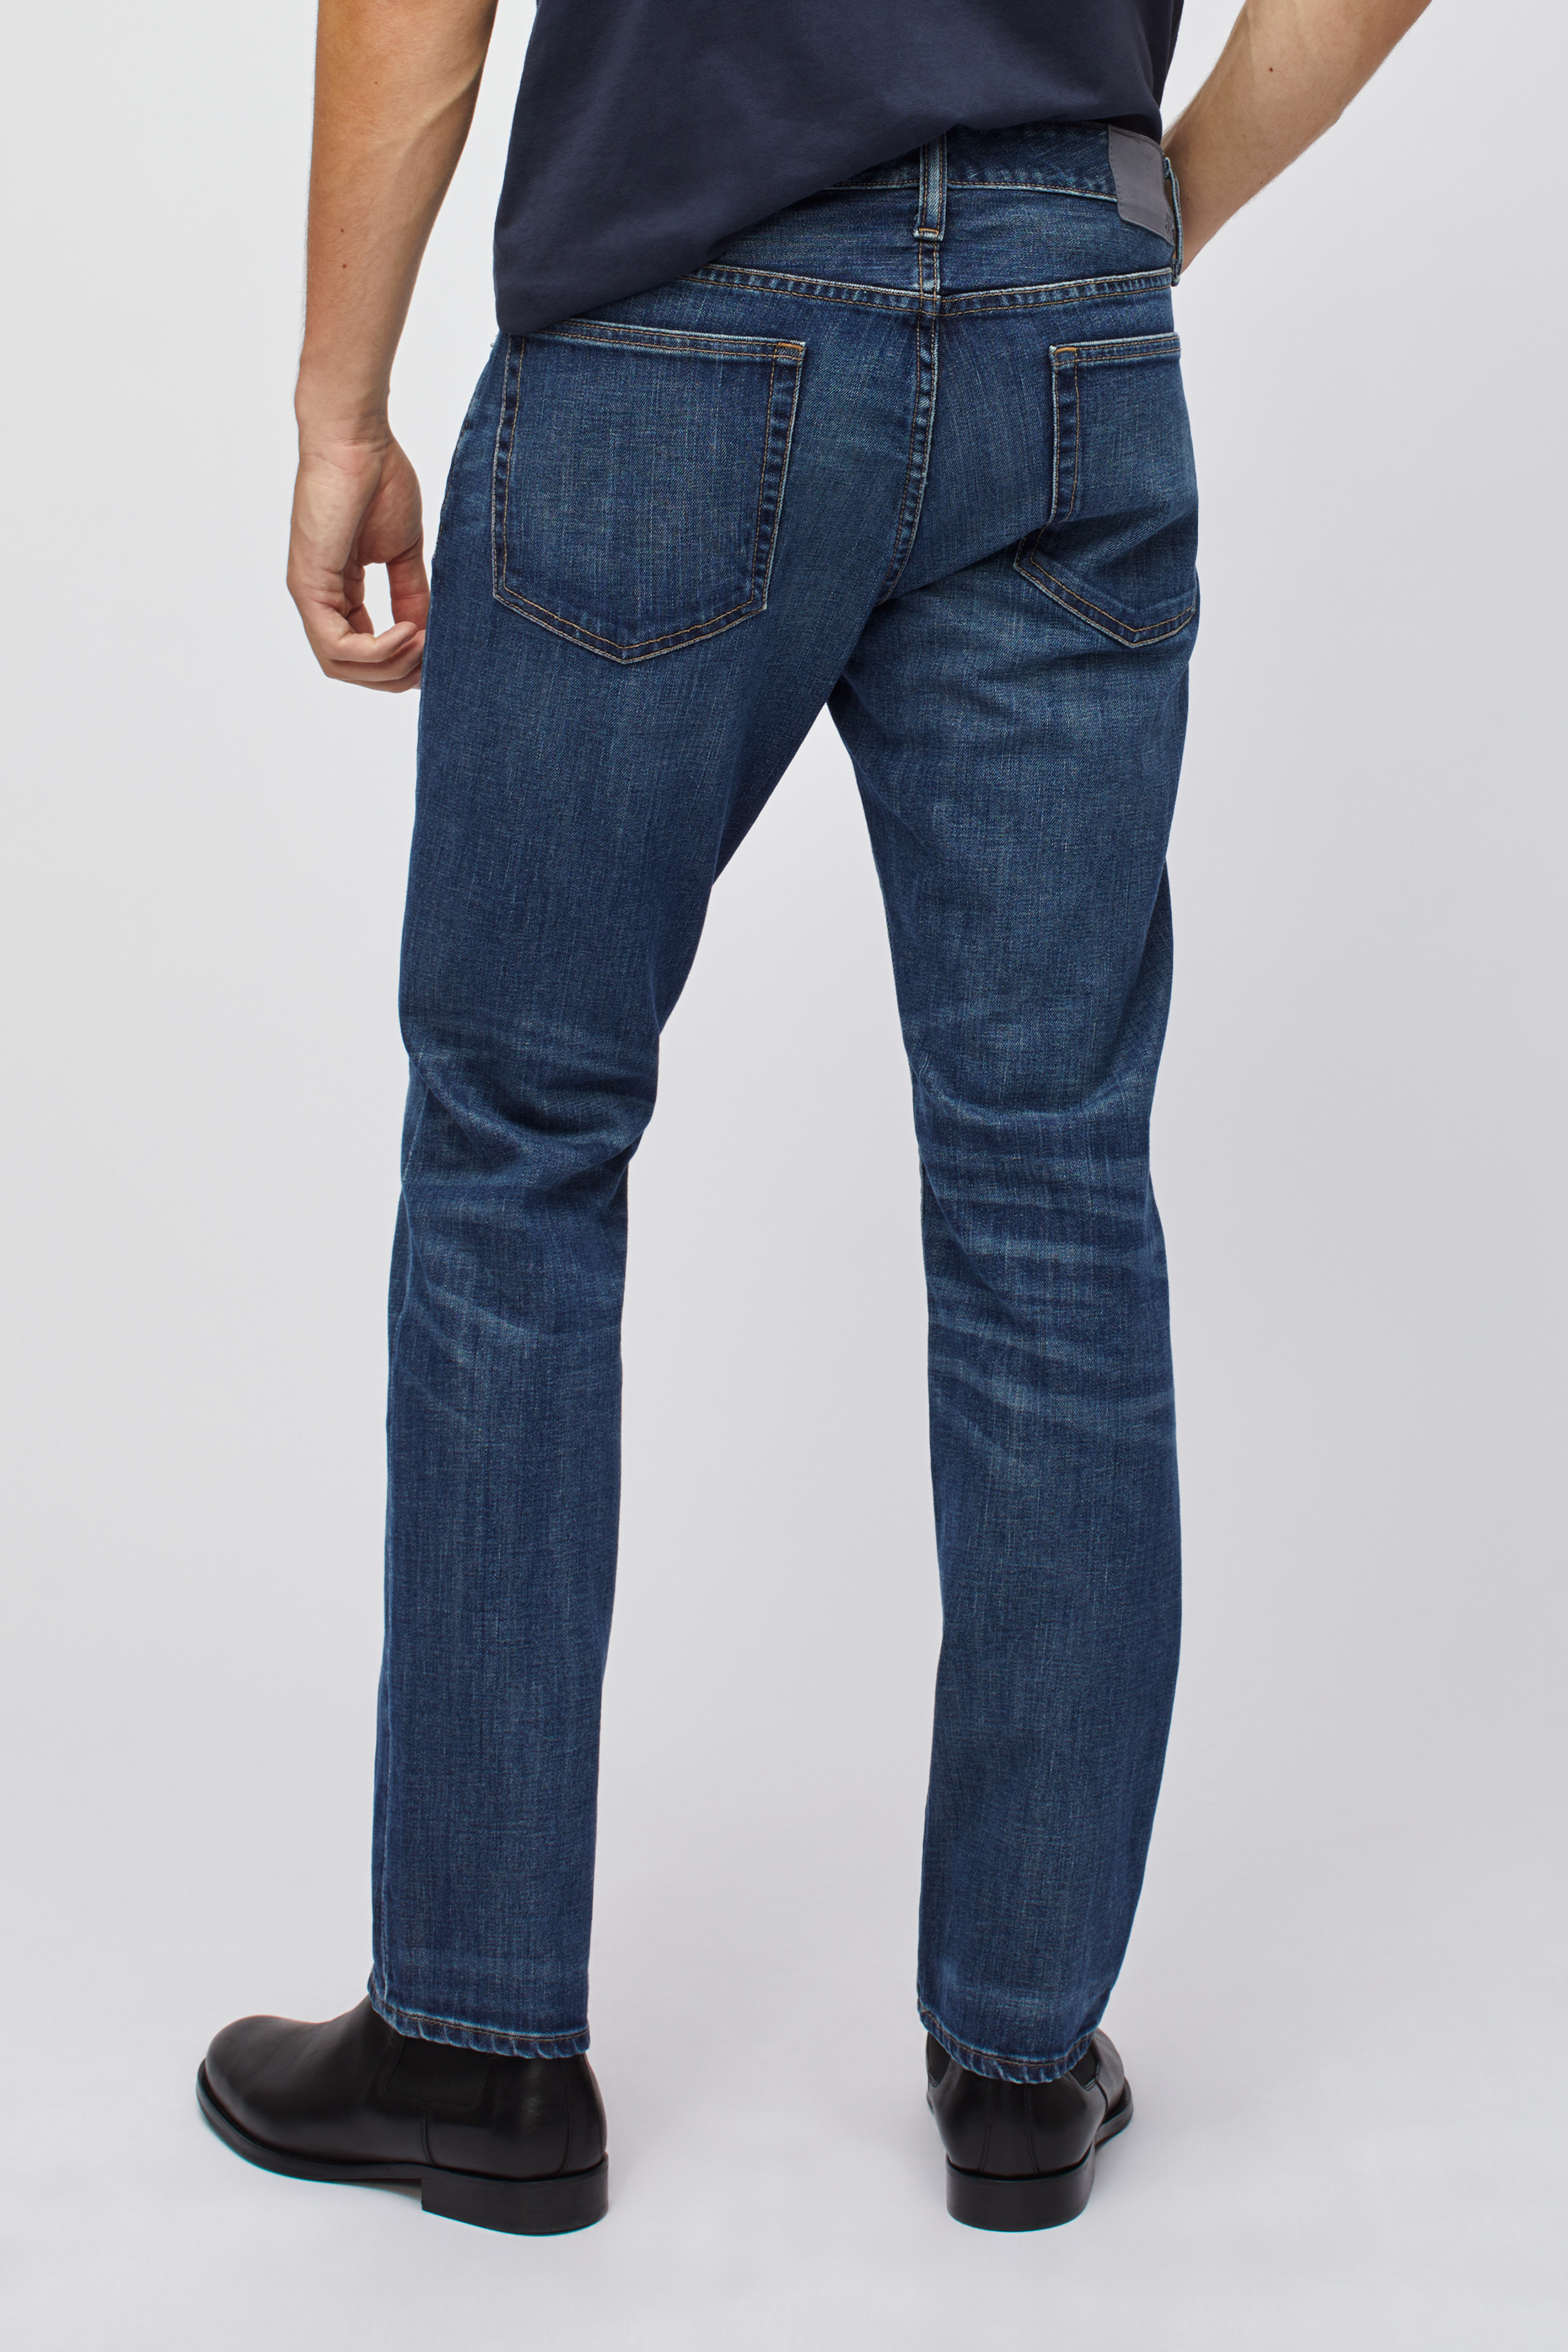 bonobos tailored fit jeans